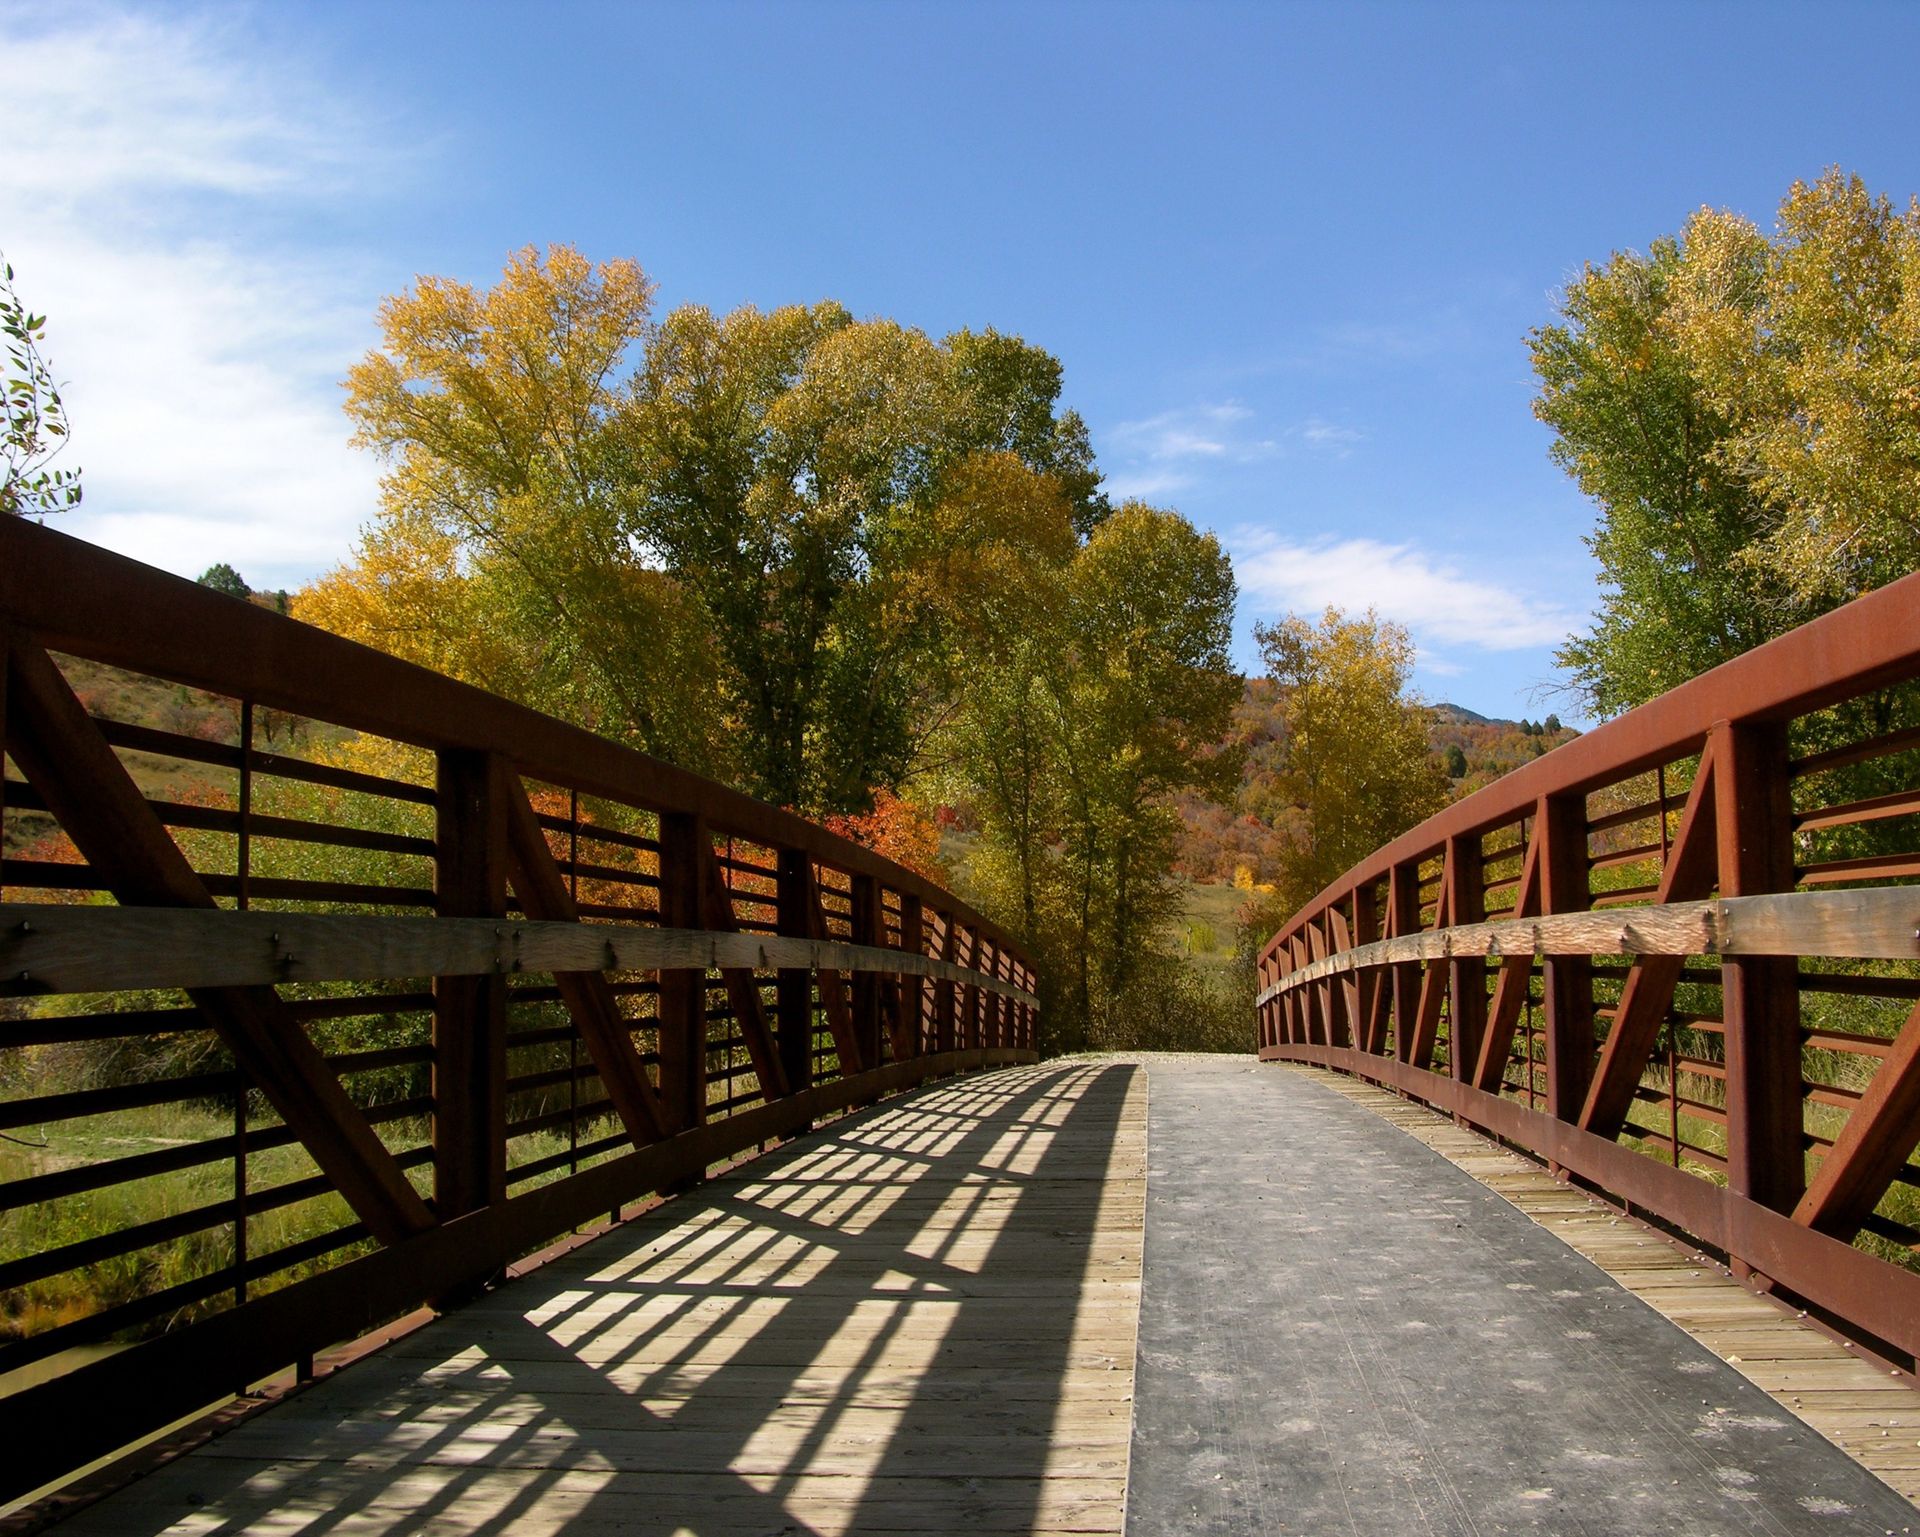 A wooden bridge in the country.